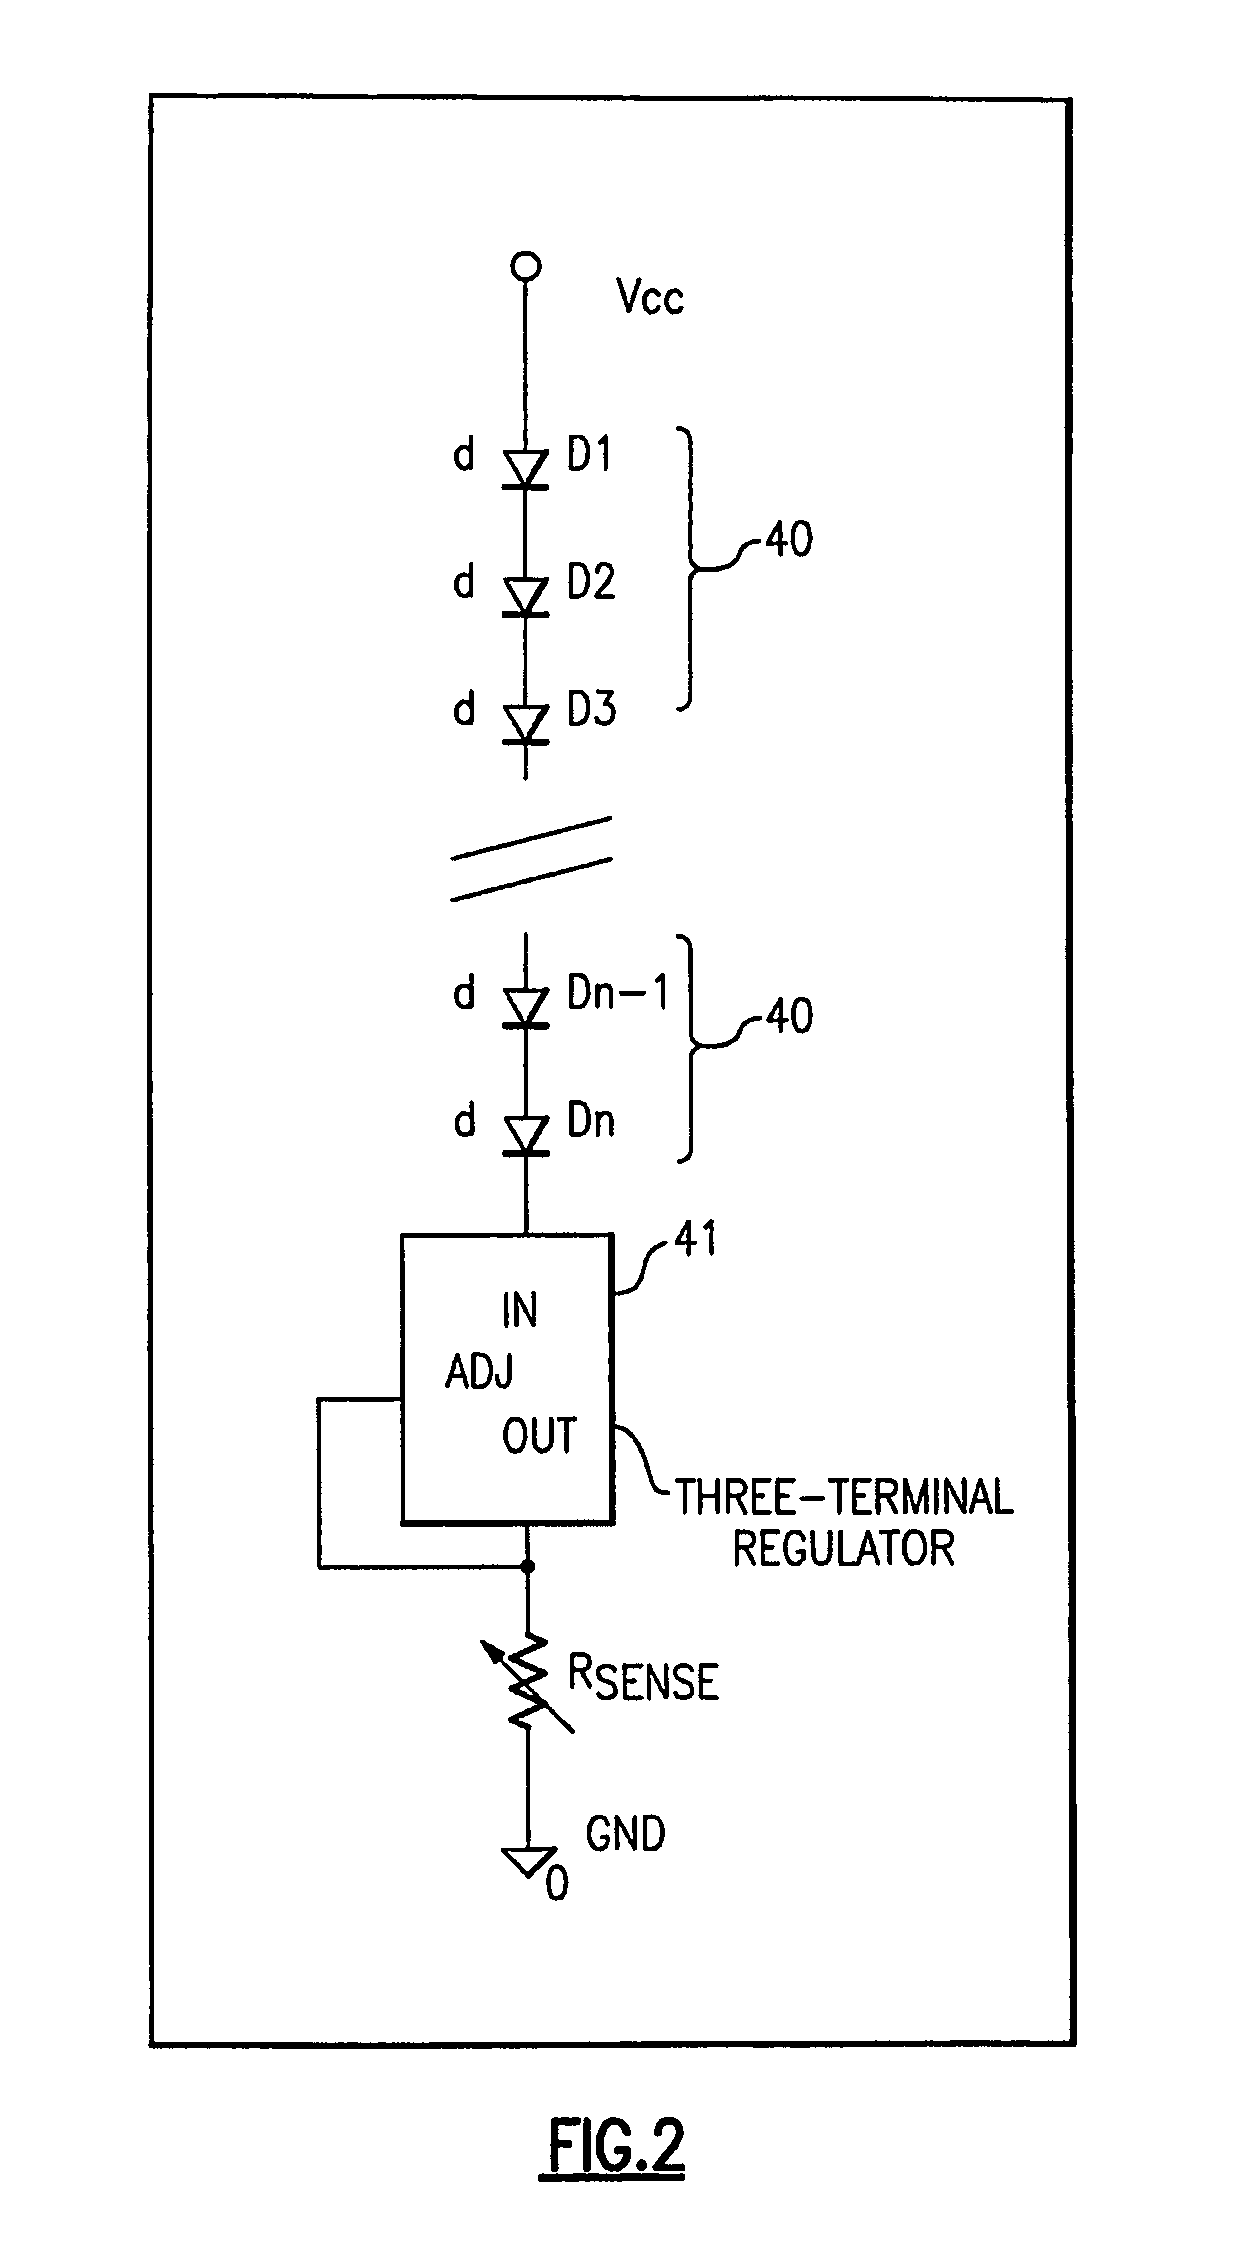 Lighting device circuit with series-connected solid state light emitters and current regulator